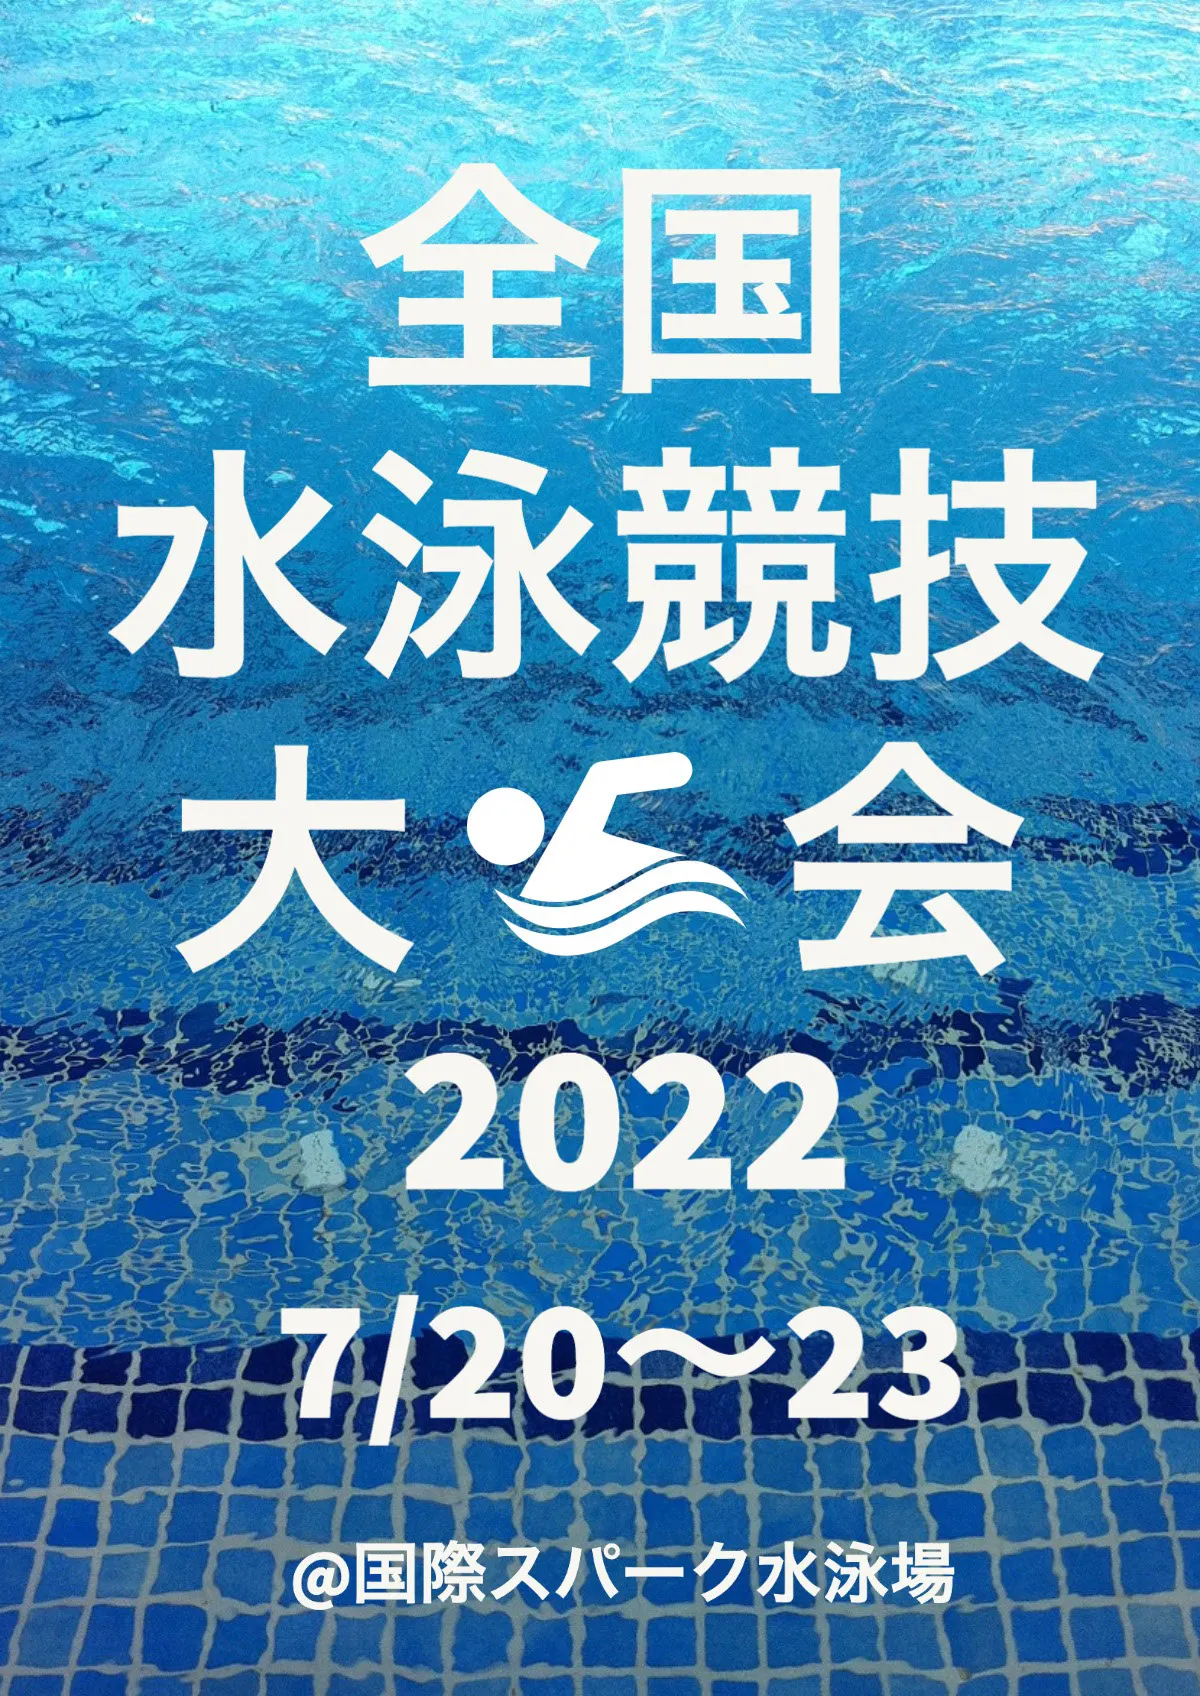 National Swimming Tournament poster